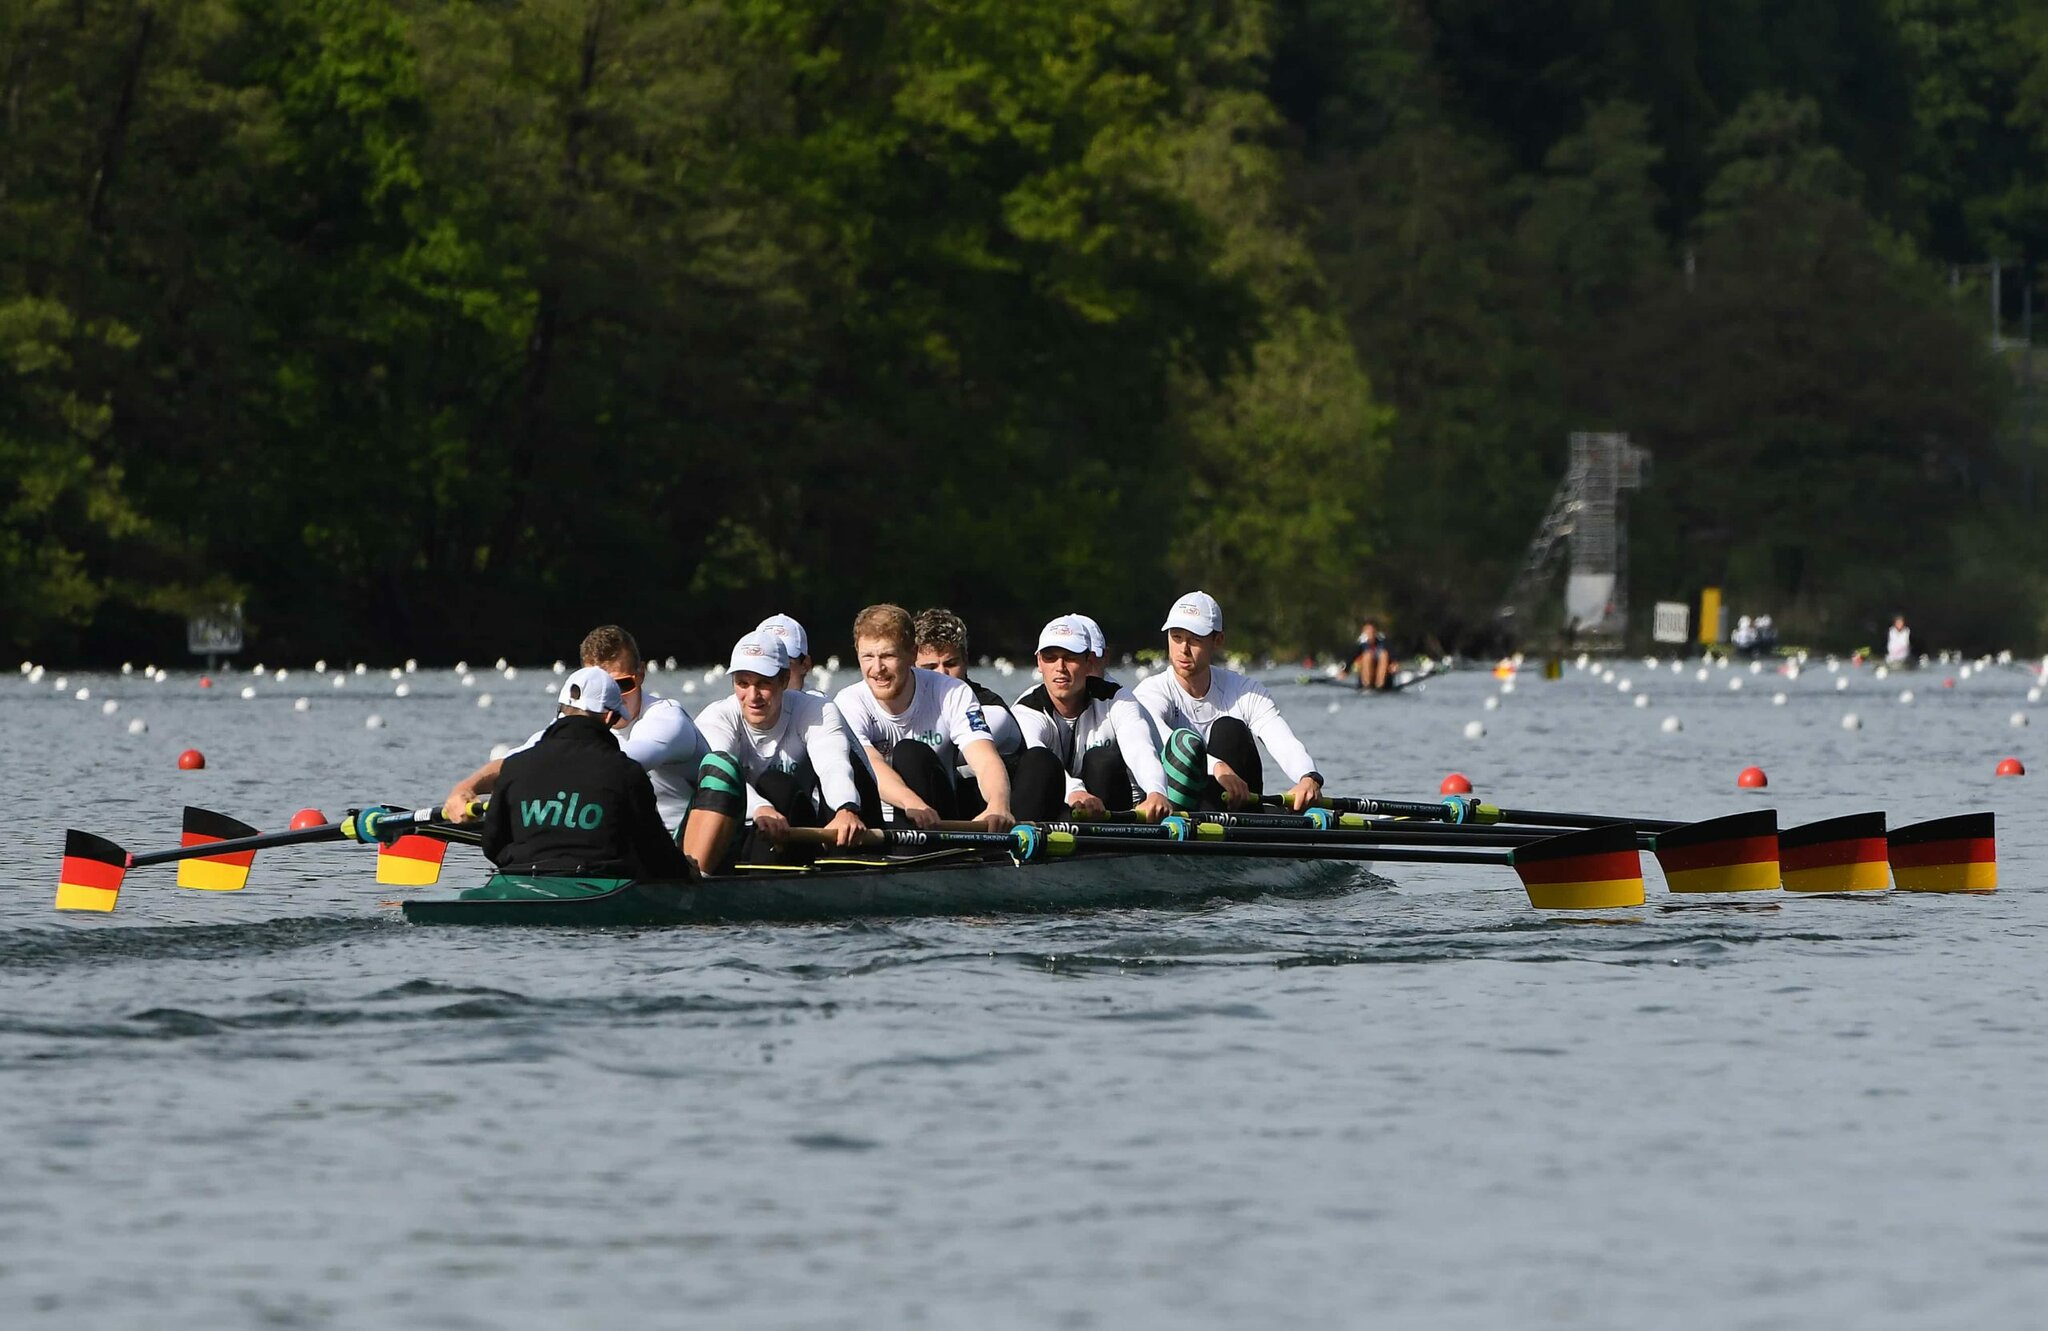 The German 8th star from Lindenhorst will compete in the World Cup in Lucerne with renewed courage: the German rowing ship will once again face Great Britain and the Netherlands